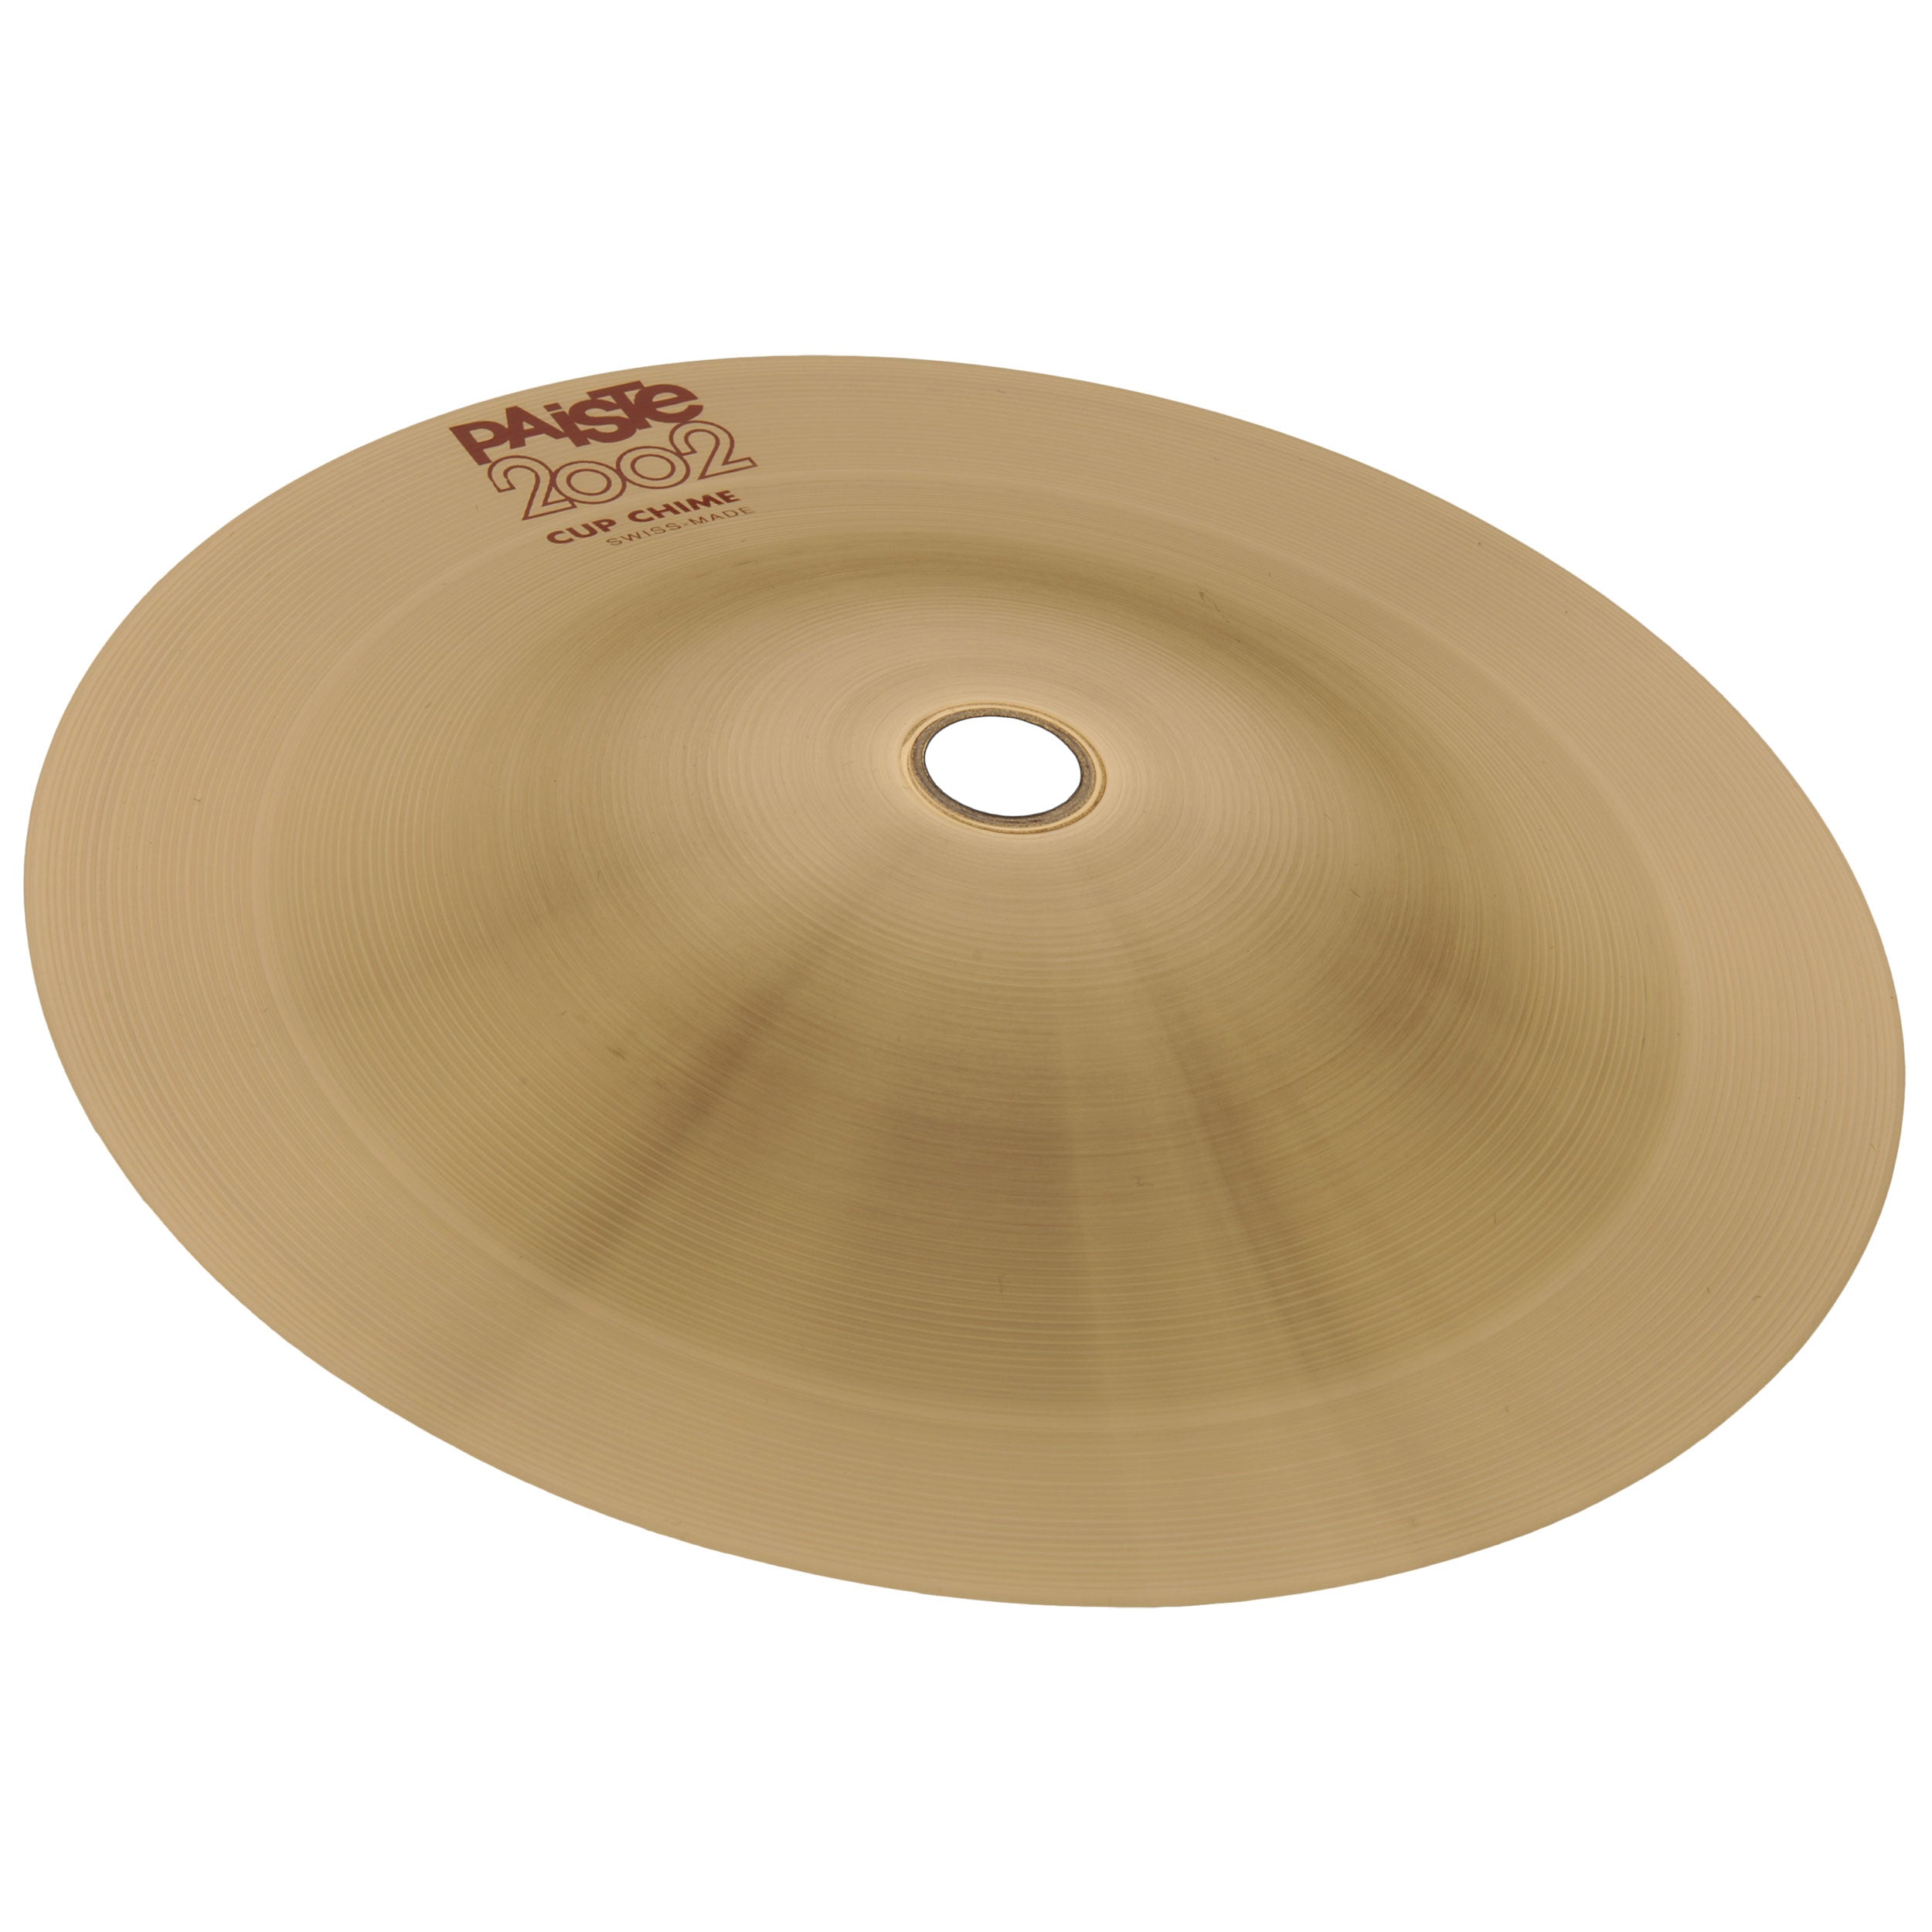 Paiste 2002 Series 7" Cup Chime Cymbal